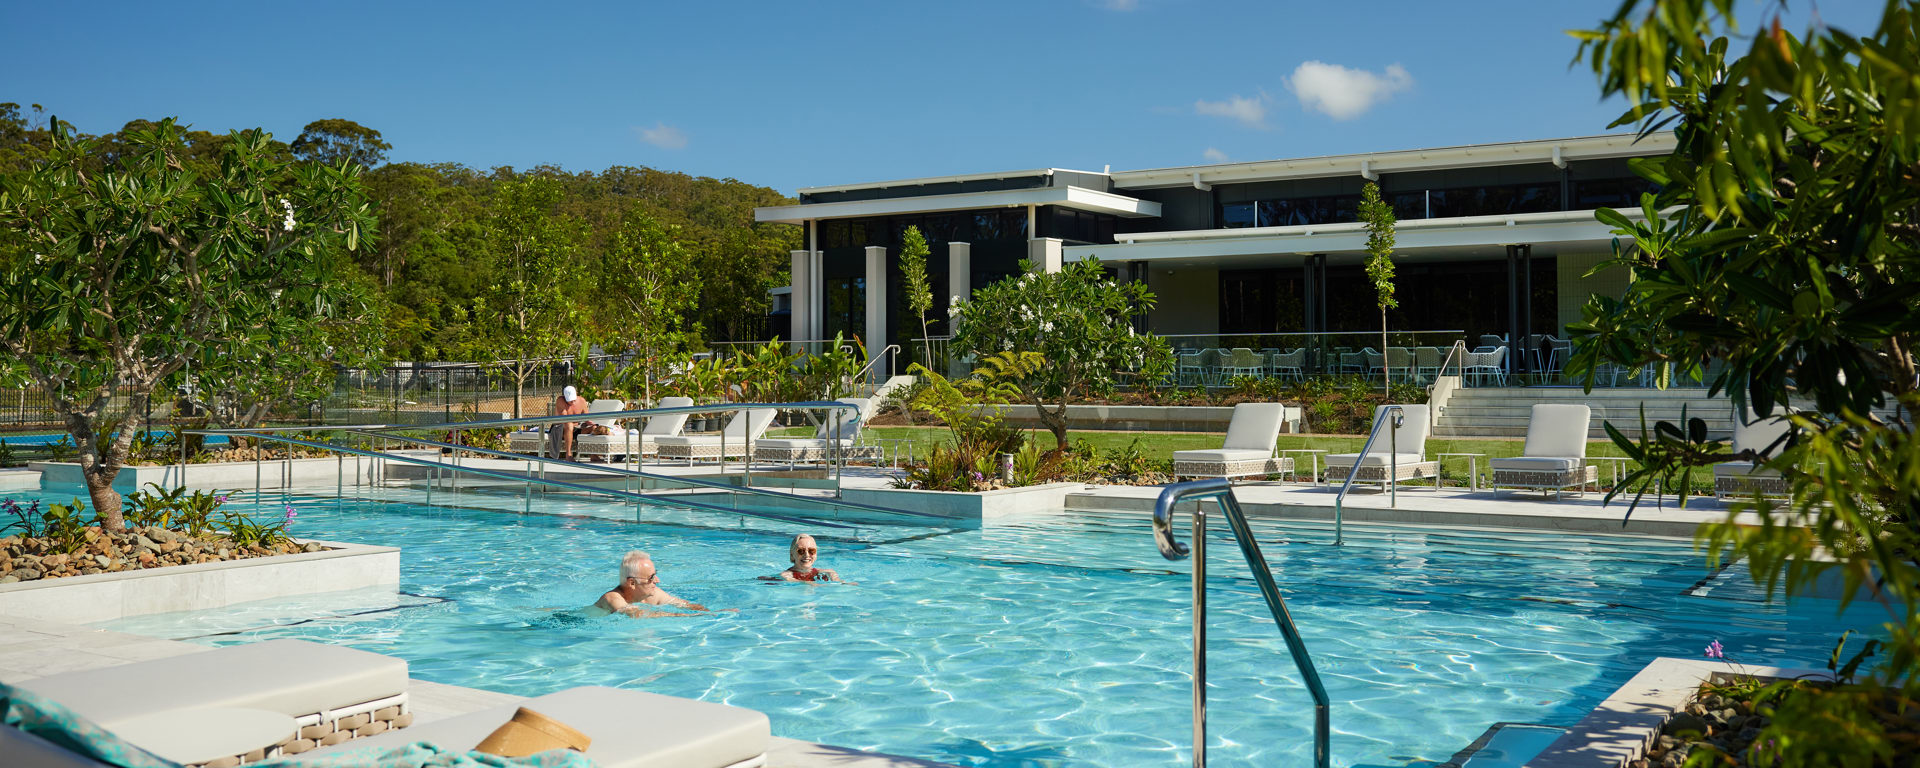 An outdoor resort pool with lush tropical landscaping in front of a modern recreational precinct building.